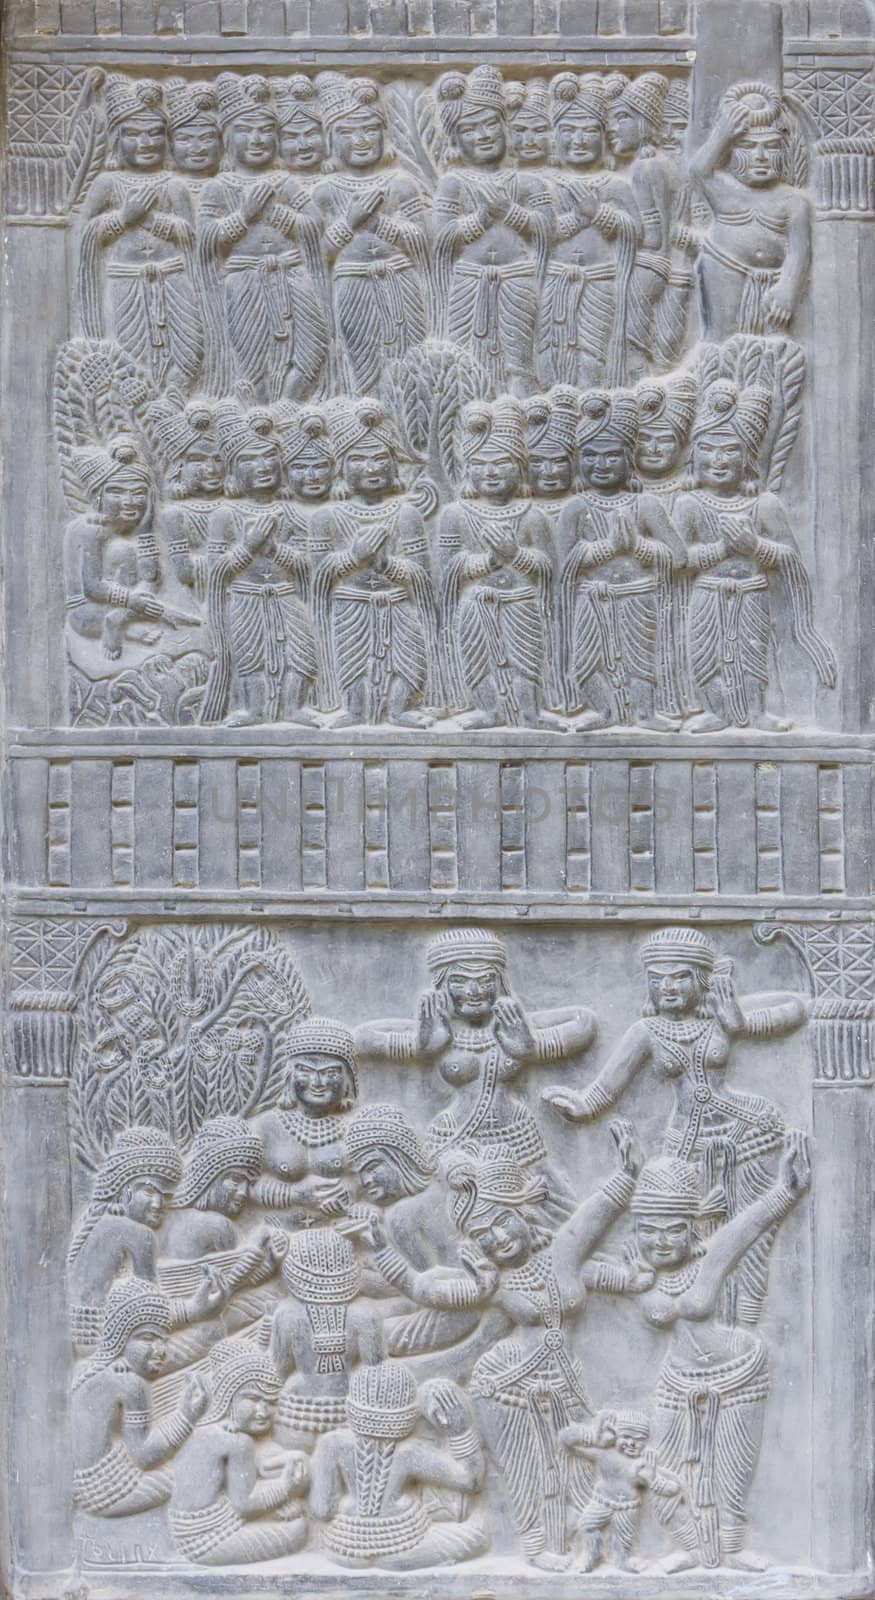 SURAT THANI, THAILAND - MARCH 17 : Ancient art on temple wall at Suanmokkh temple on March 17, 2012 in Surat Thani, Thailand.